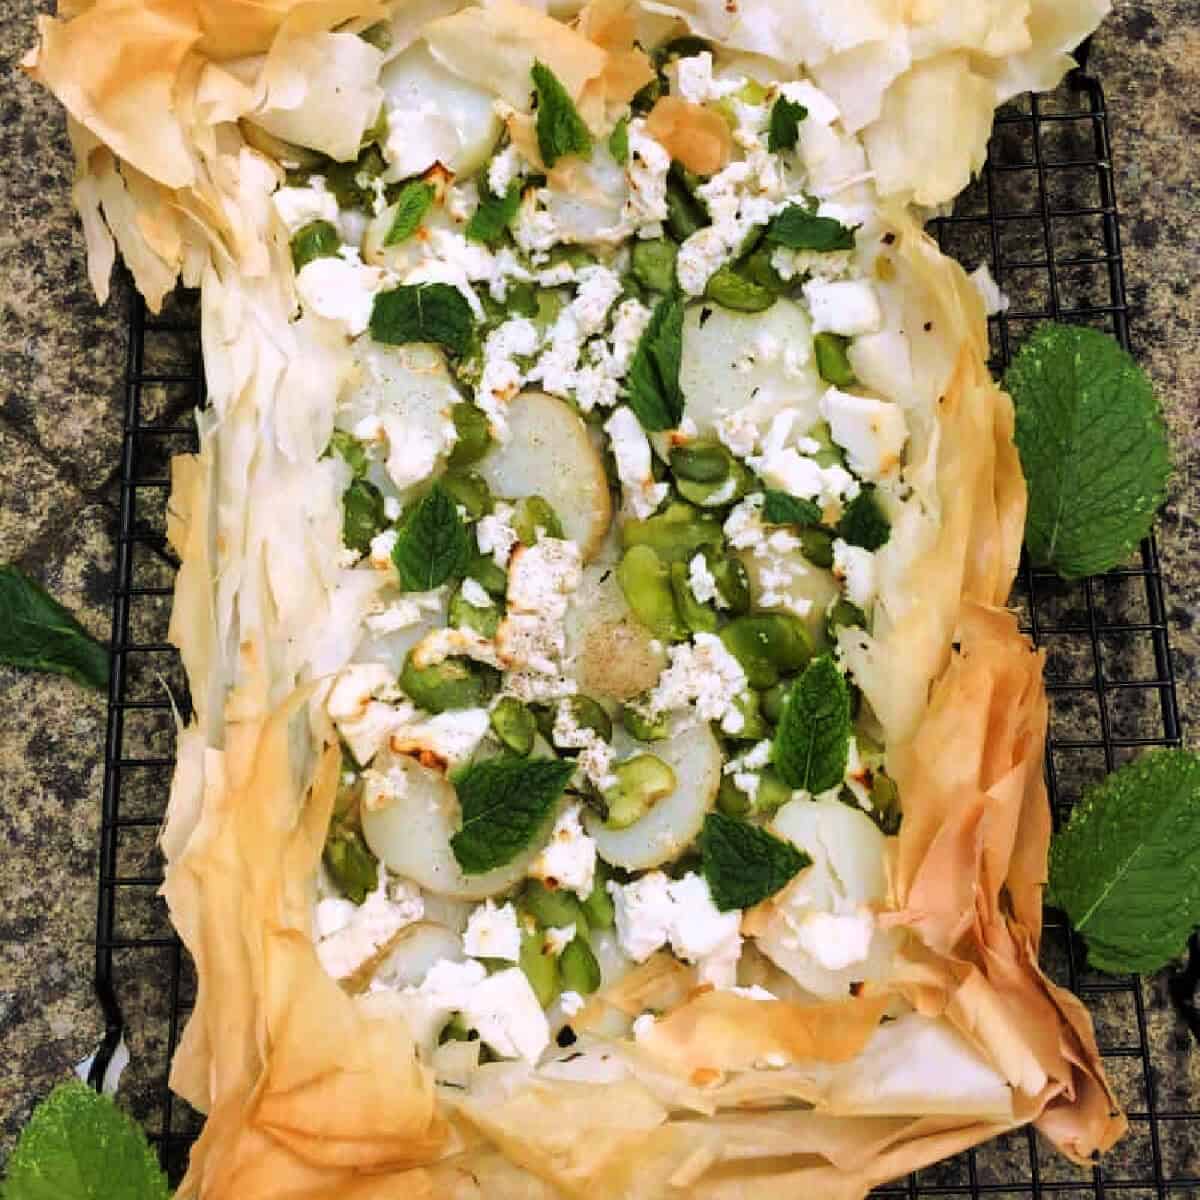 Broad bean filo tart with mint leaves.